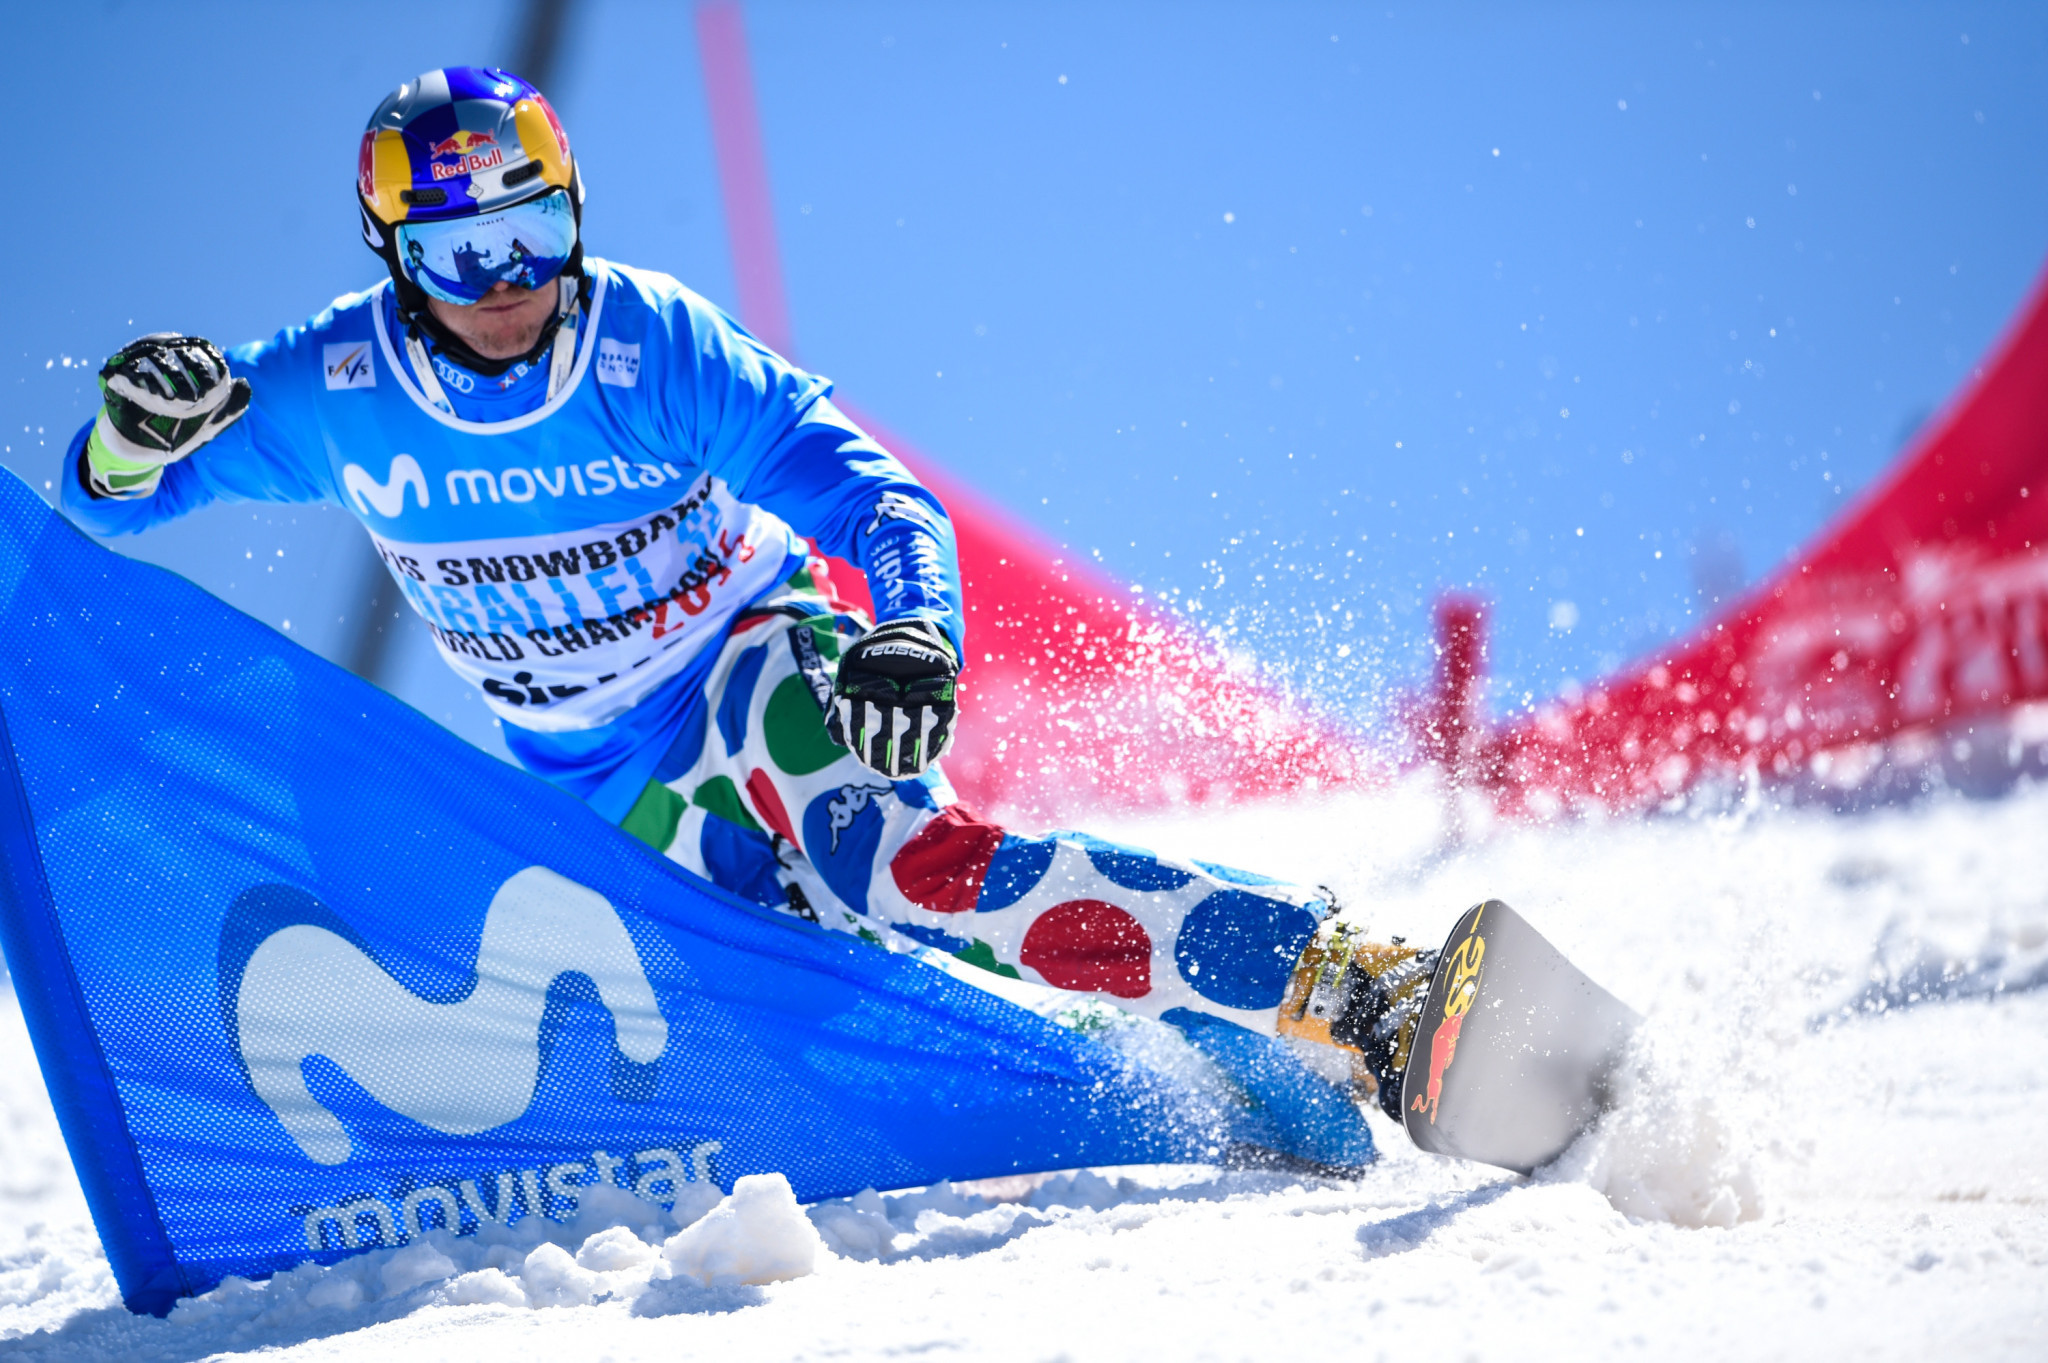 Roland Fischnaller claimed a superb home parallel giant slalom victory at the Snowboard World Cup in Cortina D'Ampezzo ©Getty Images